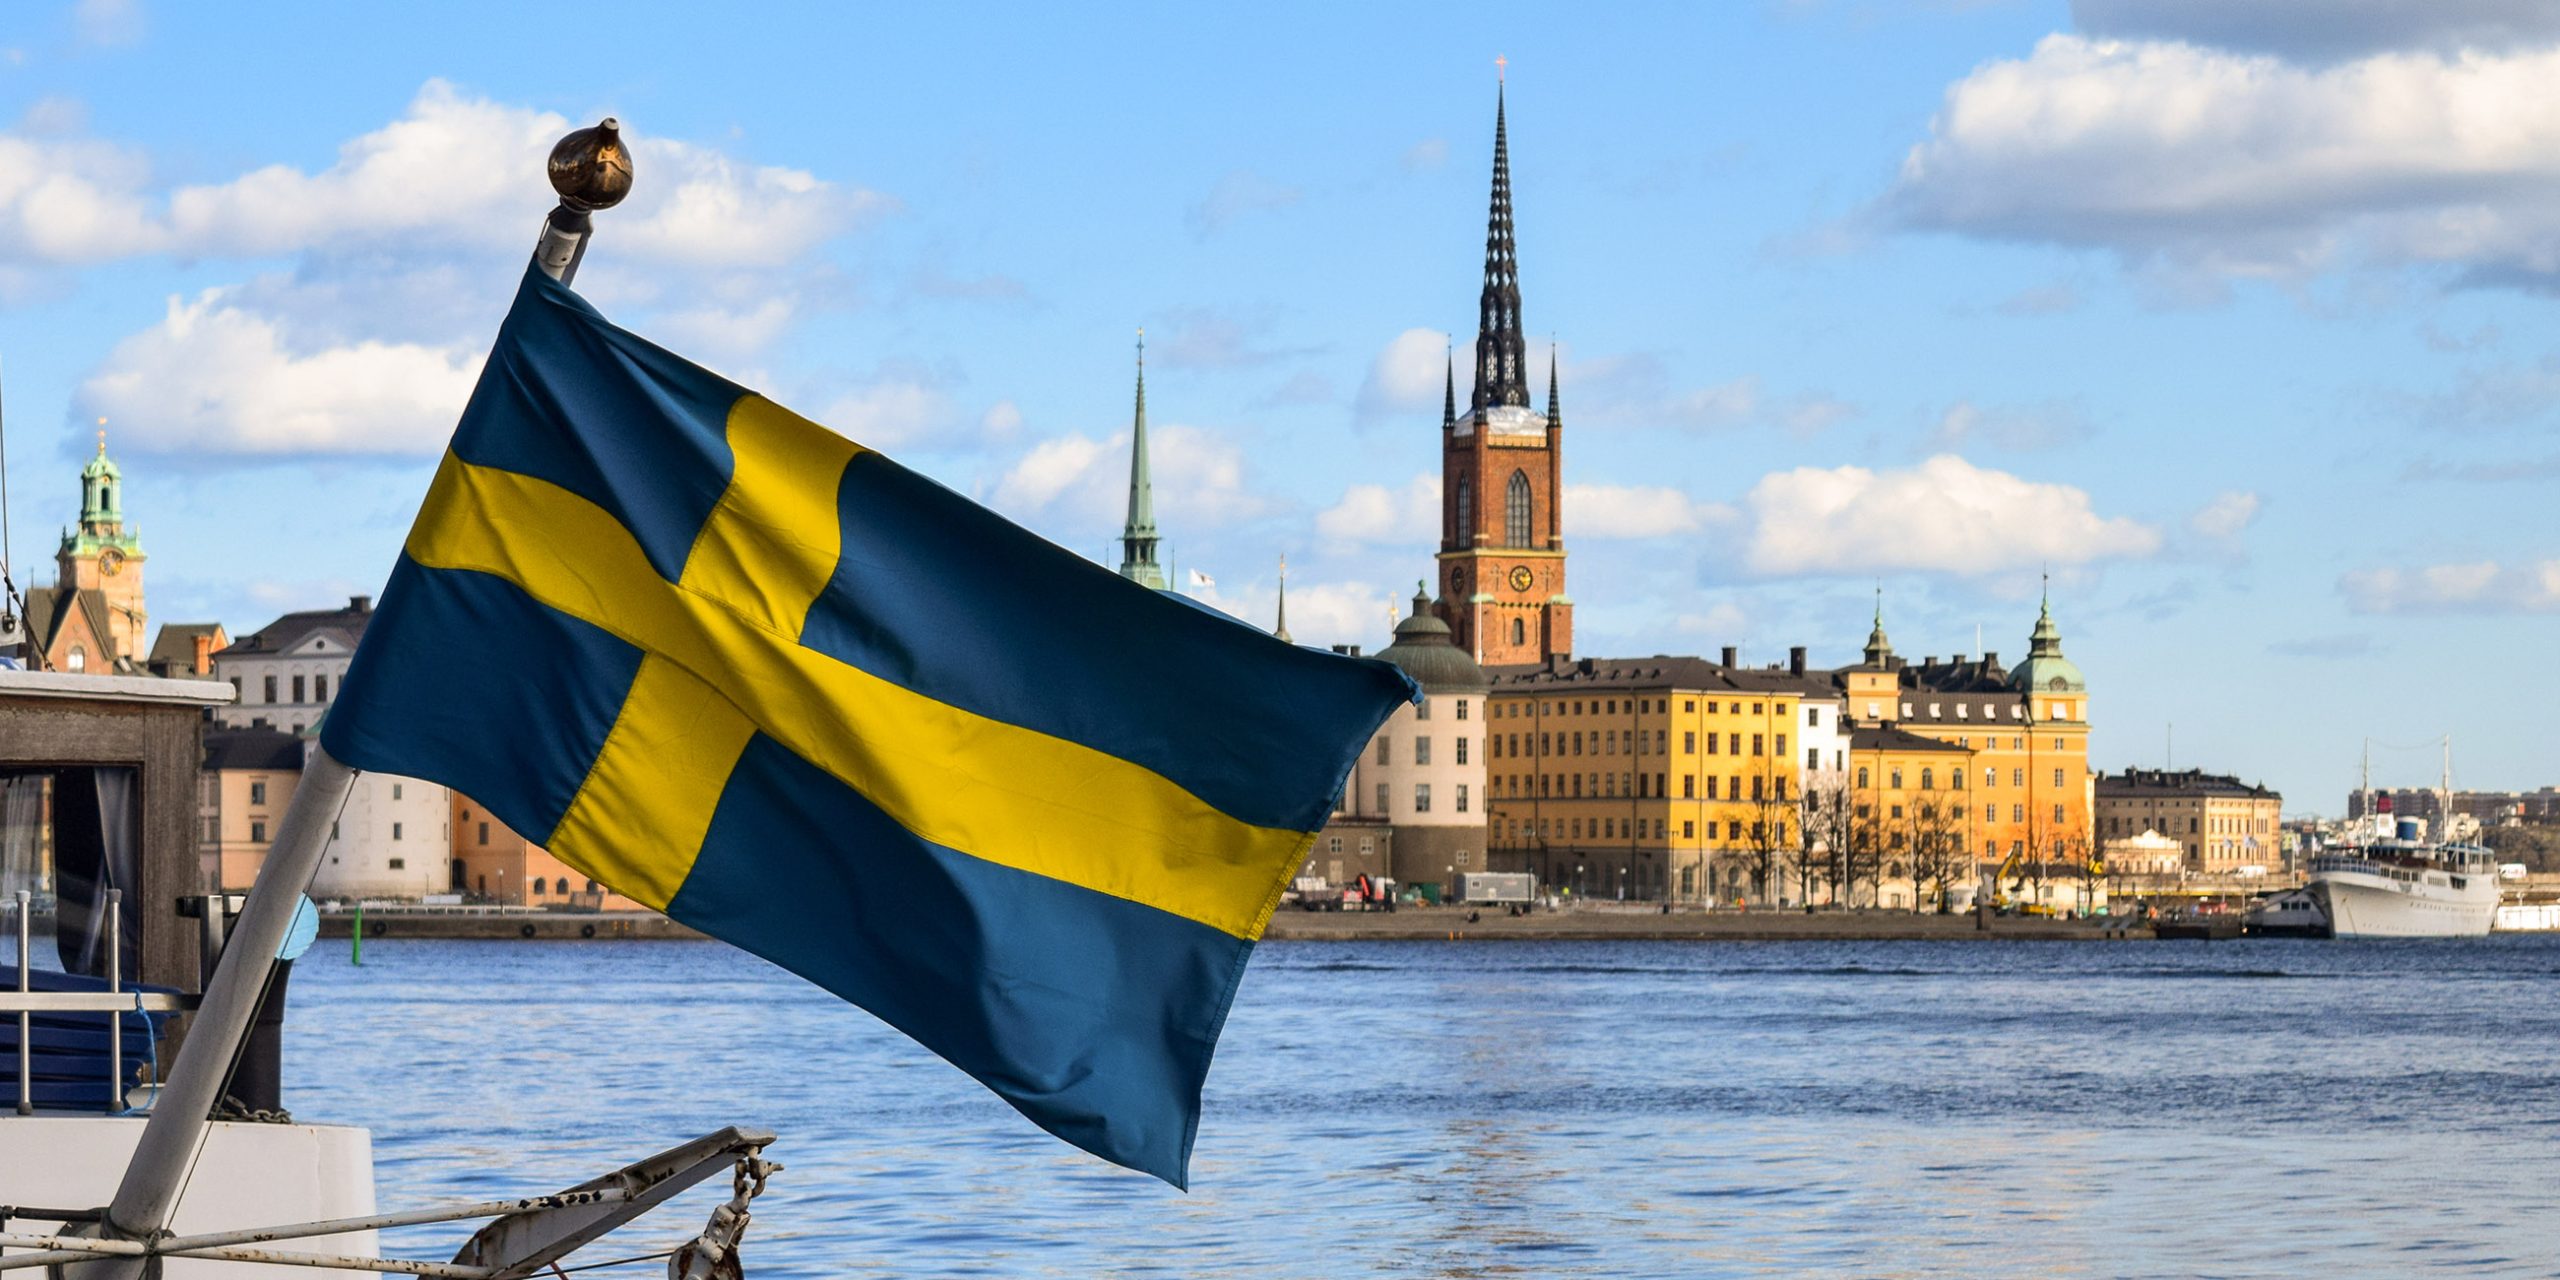 Kindred, Other Gaming Operators To Pay Fines of Over M in Sweden – Casino.org